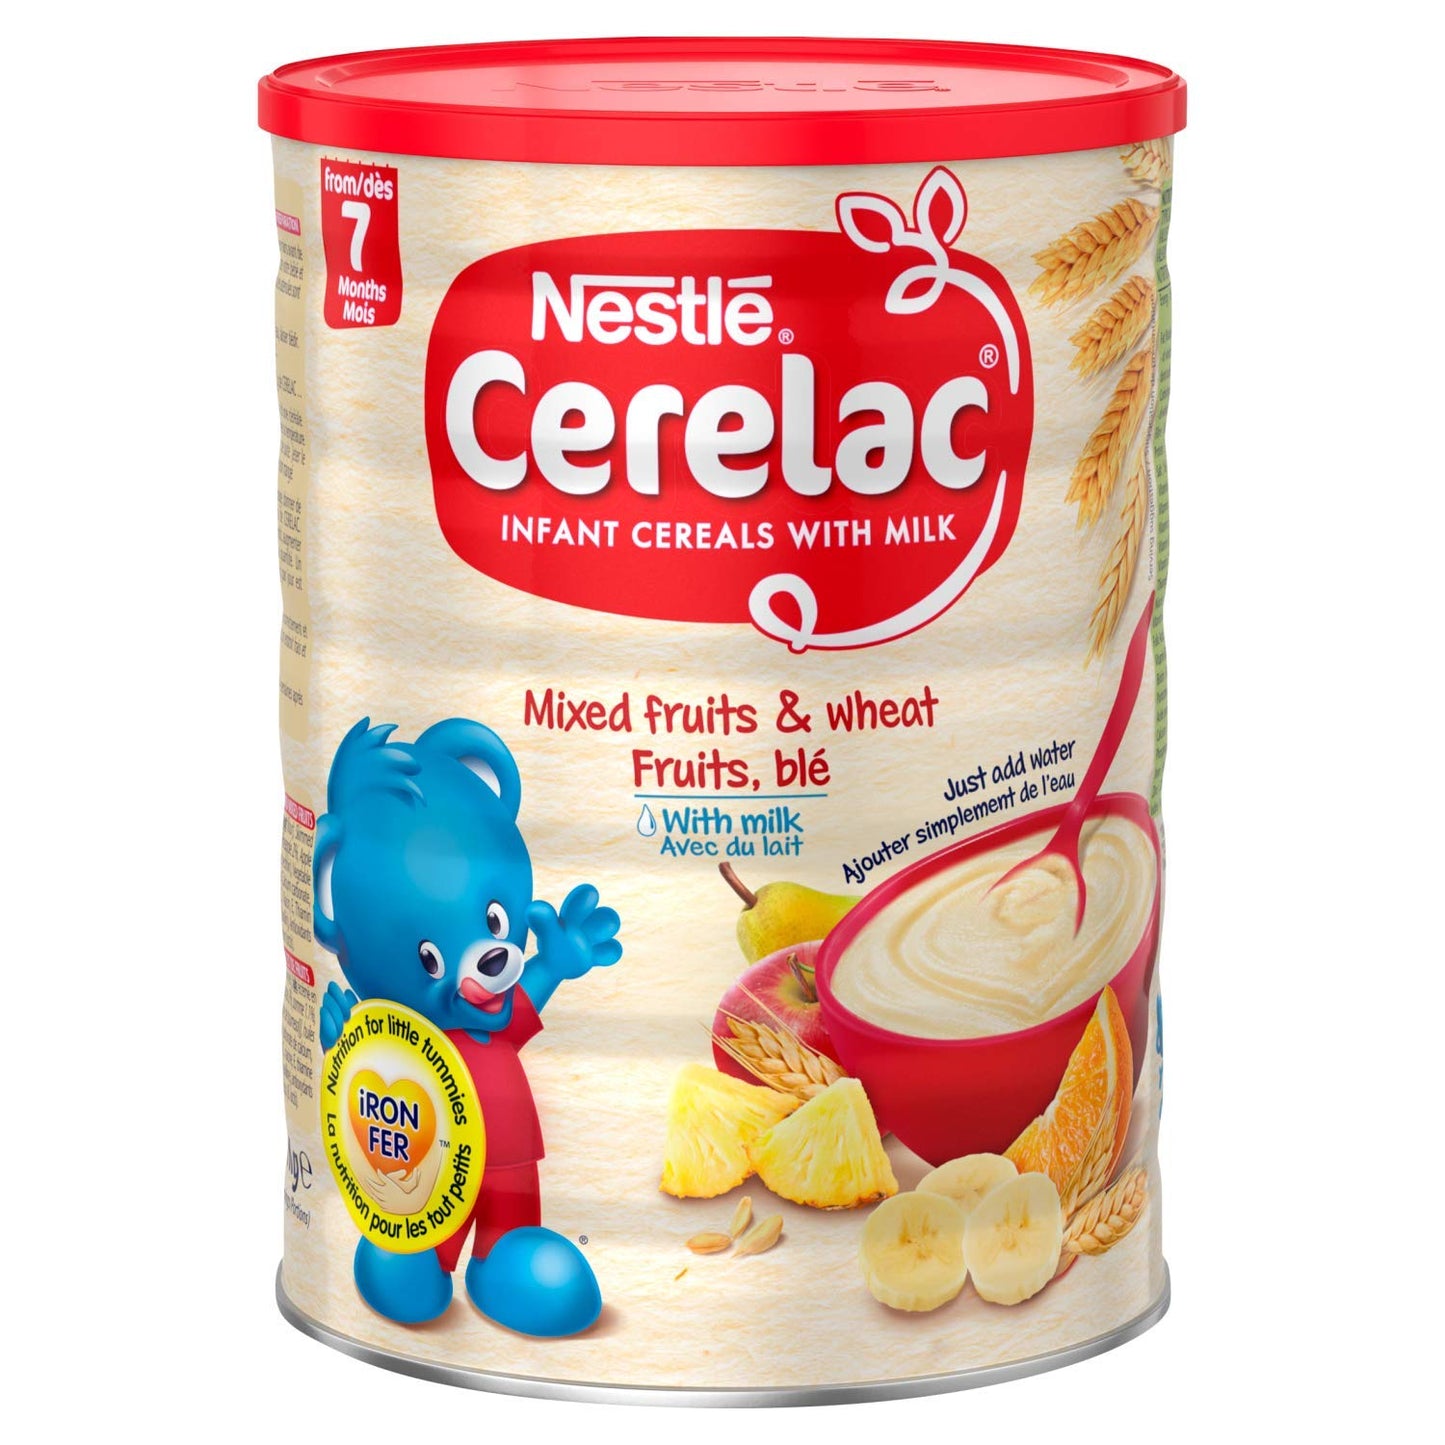 Nestle Cerelac Infant Cereal with Milk and Wheat 1 kg mixed fruit 35.27 Oz